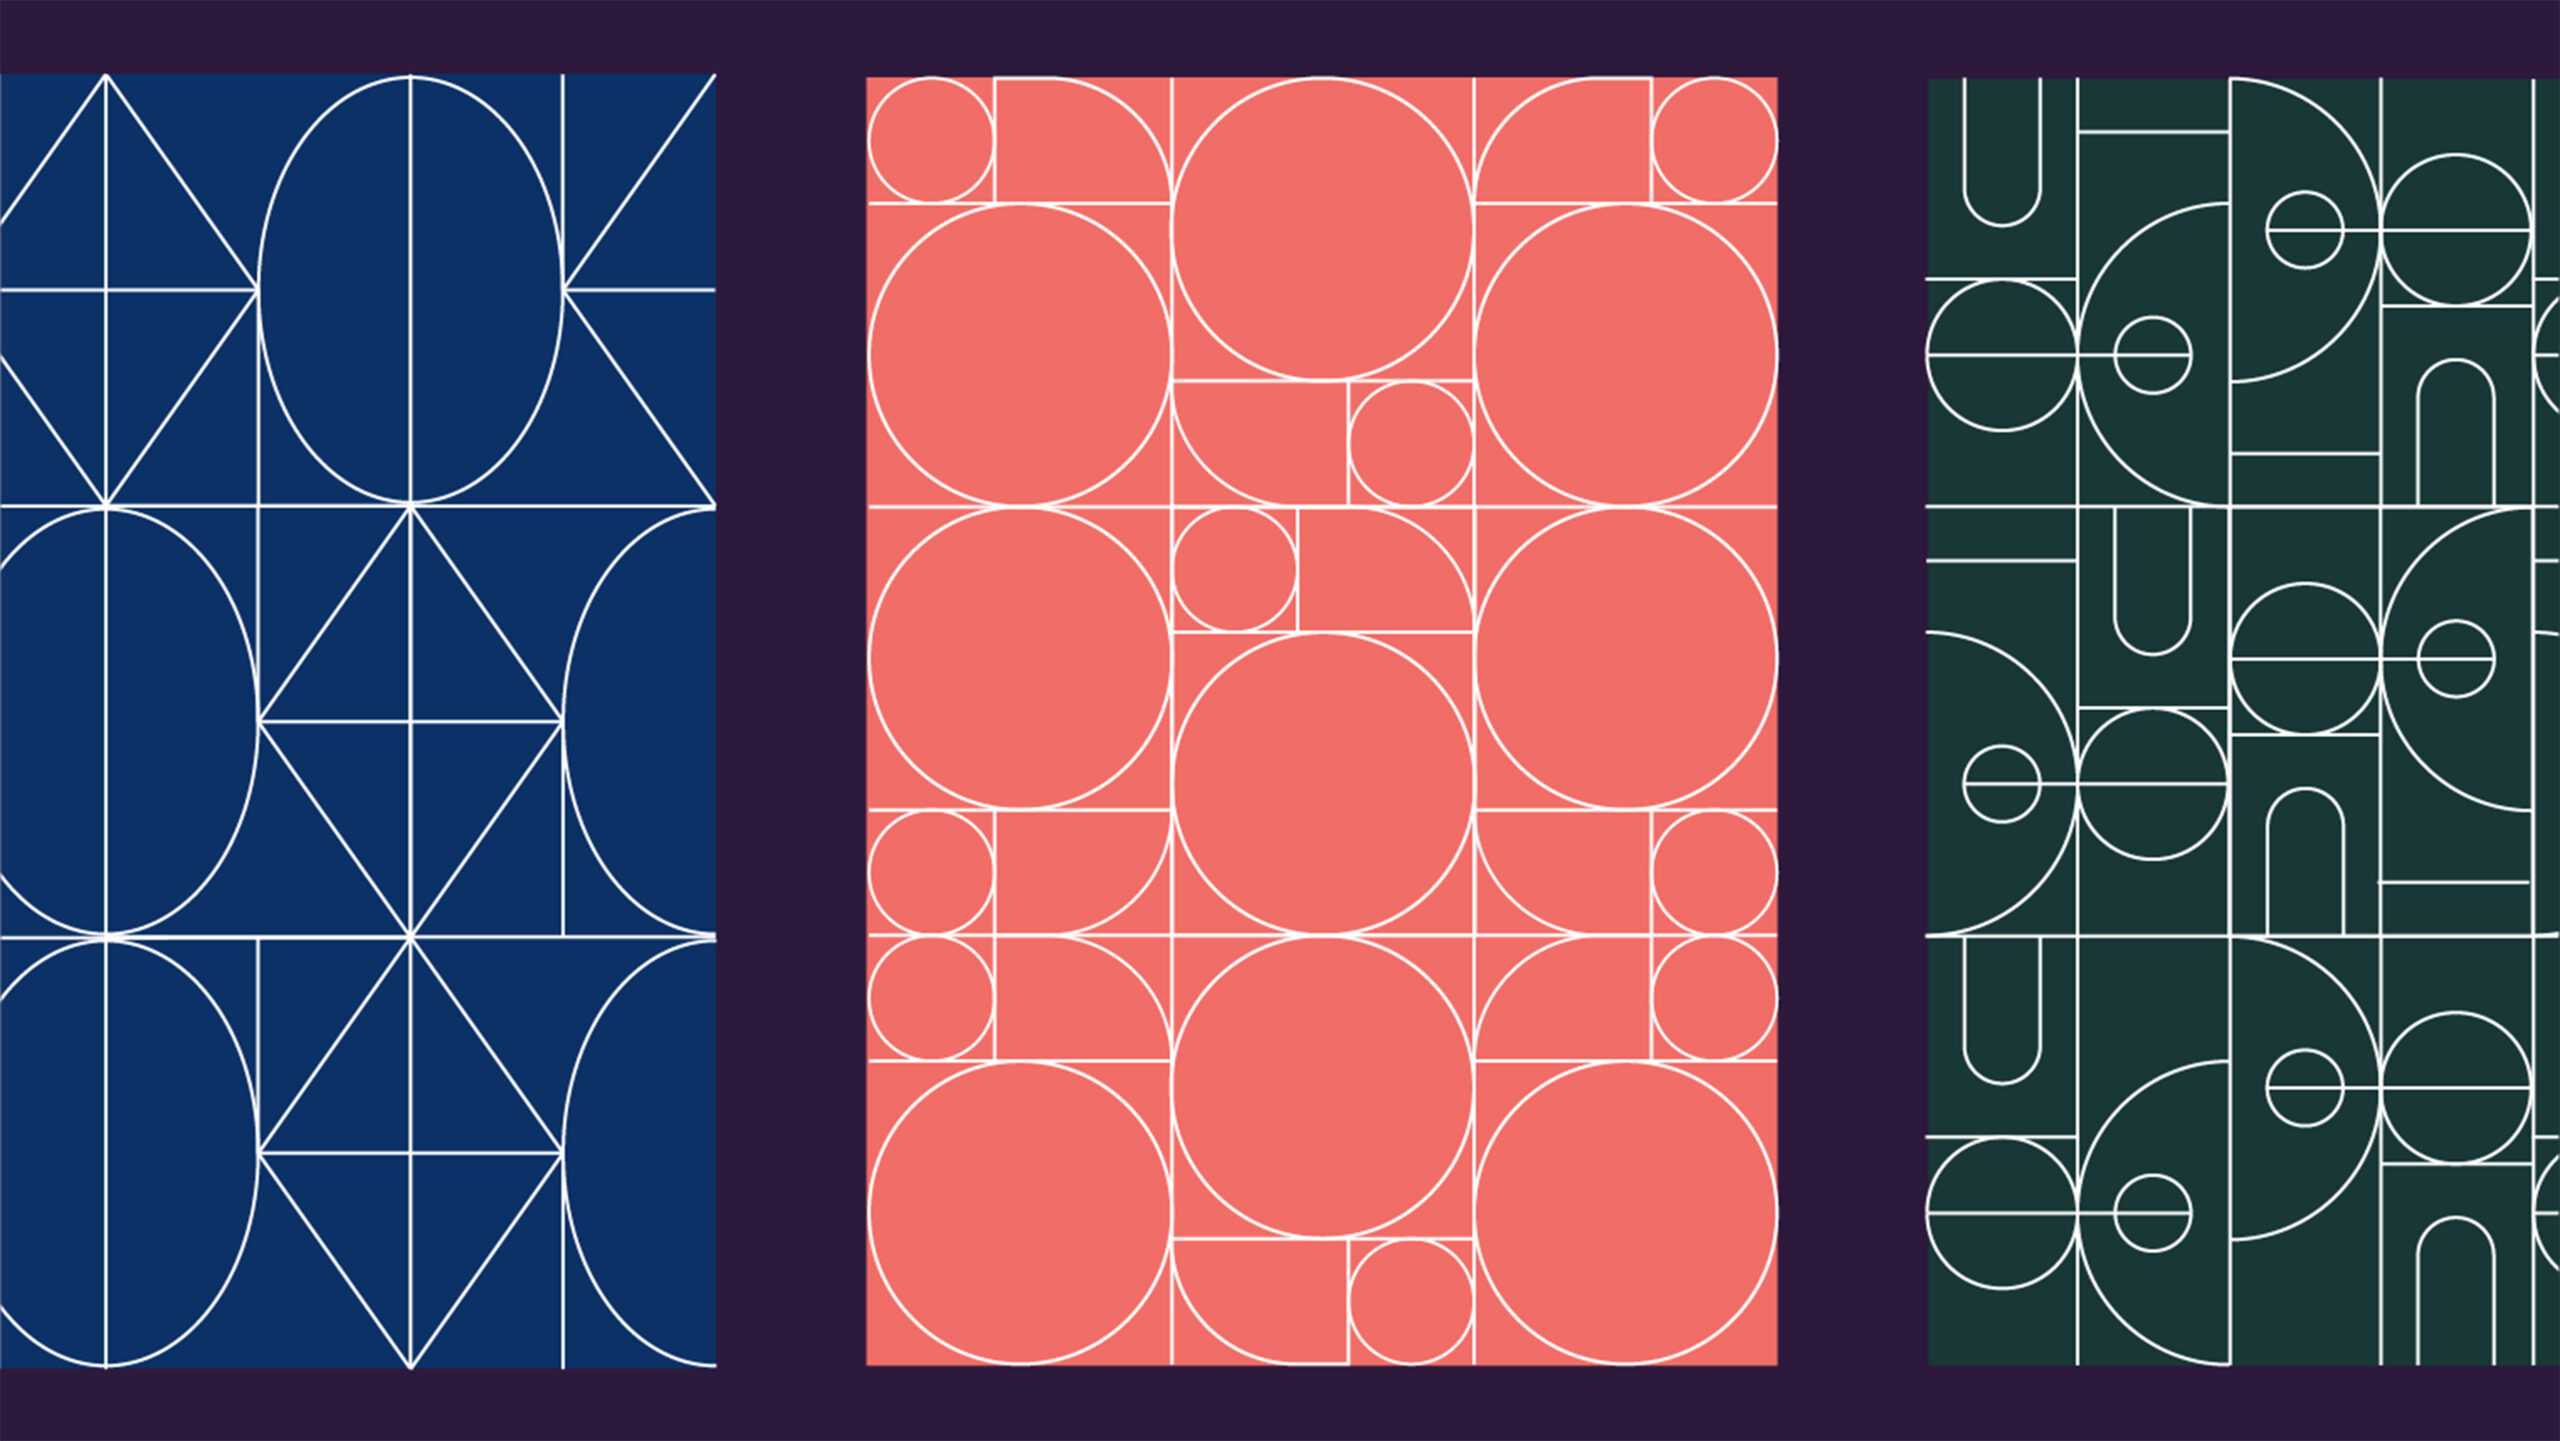 Examples of The Base grid based patterns